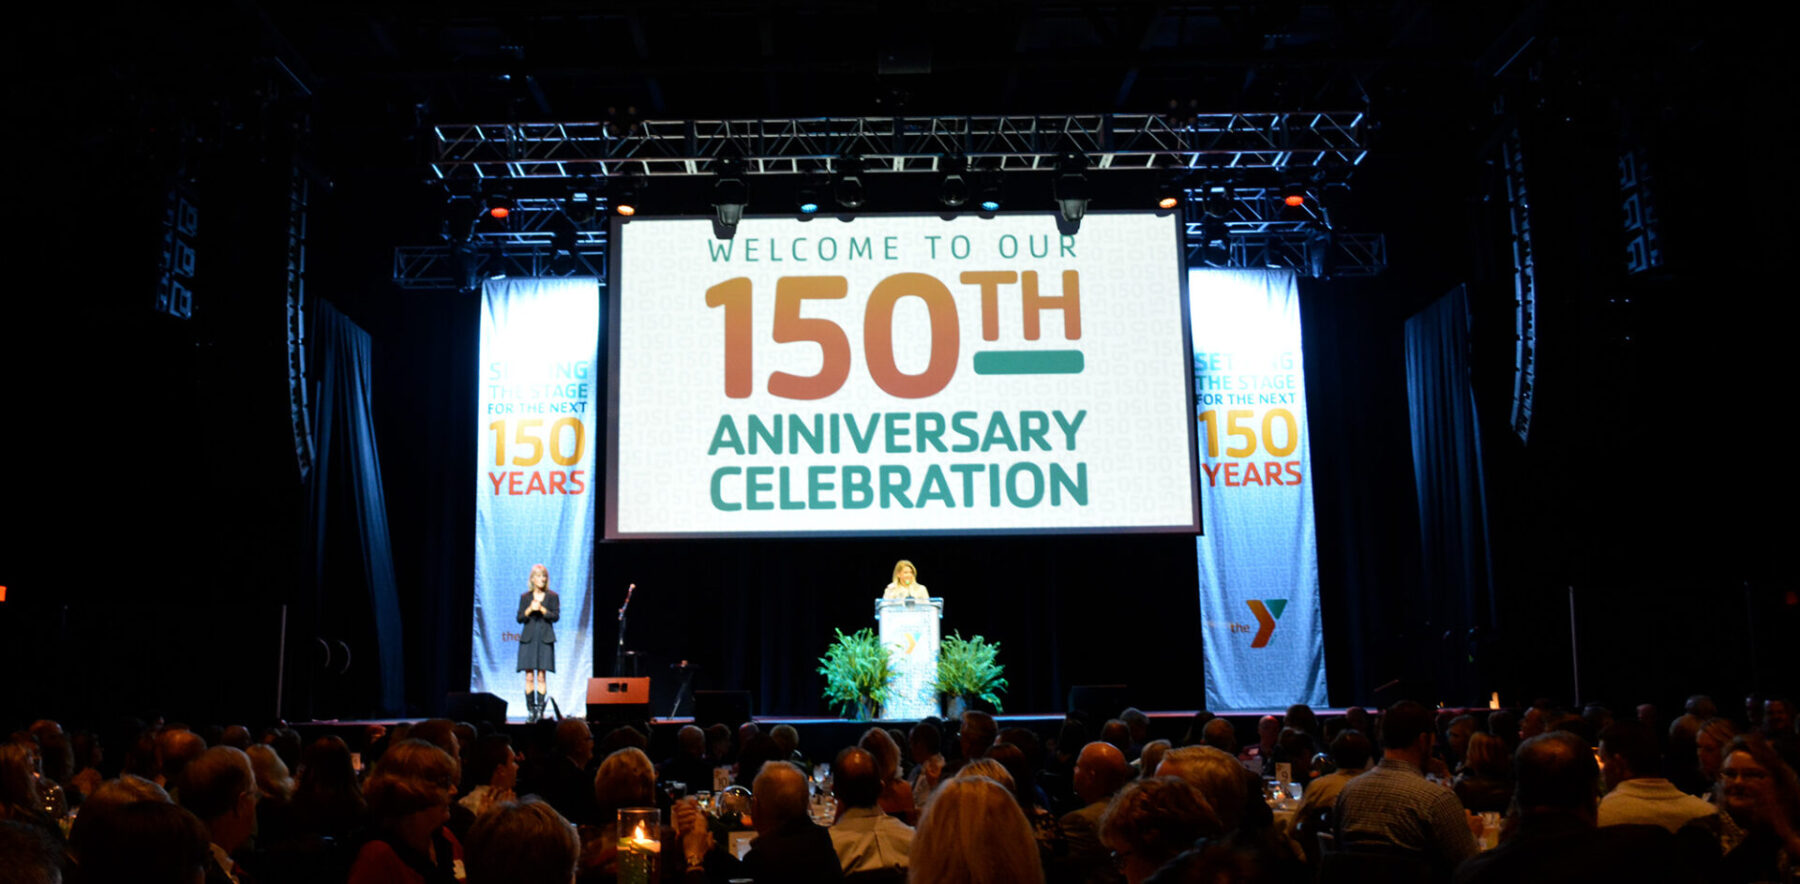 Main stage of the 150th anniversary celebration event.